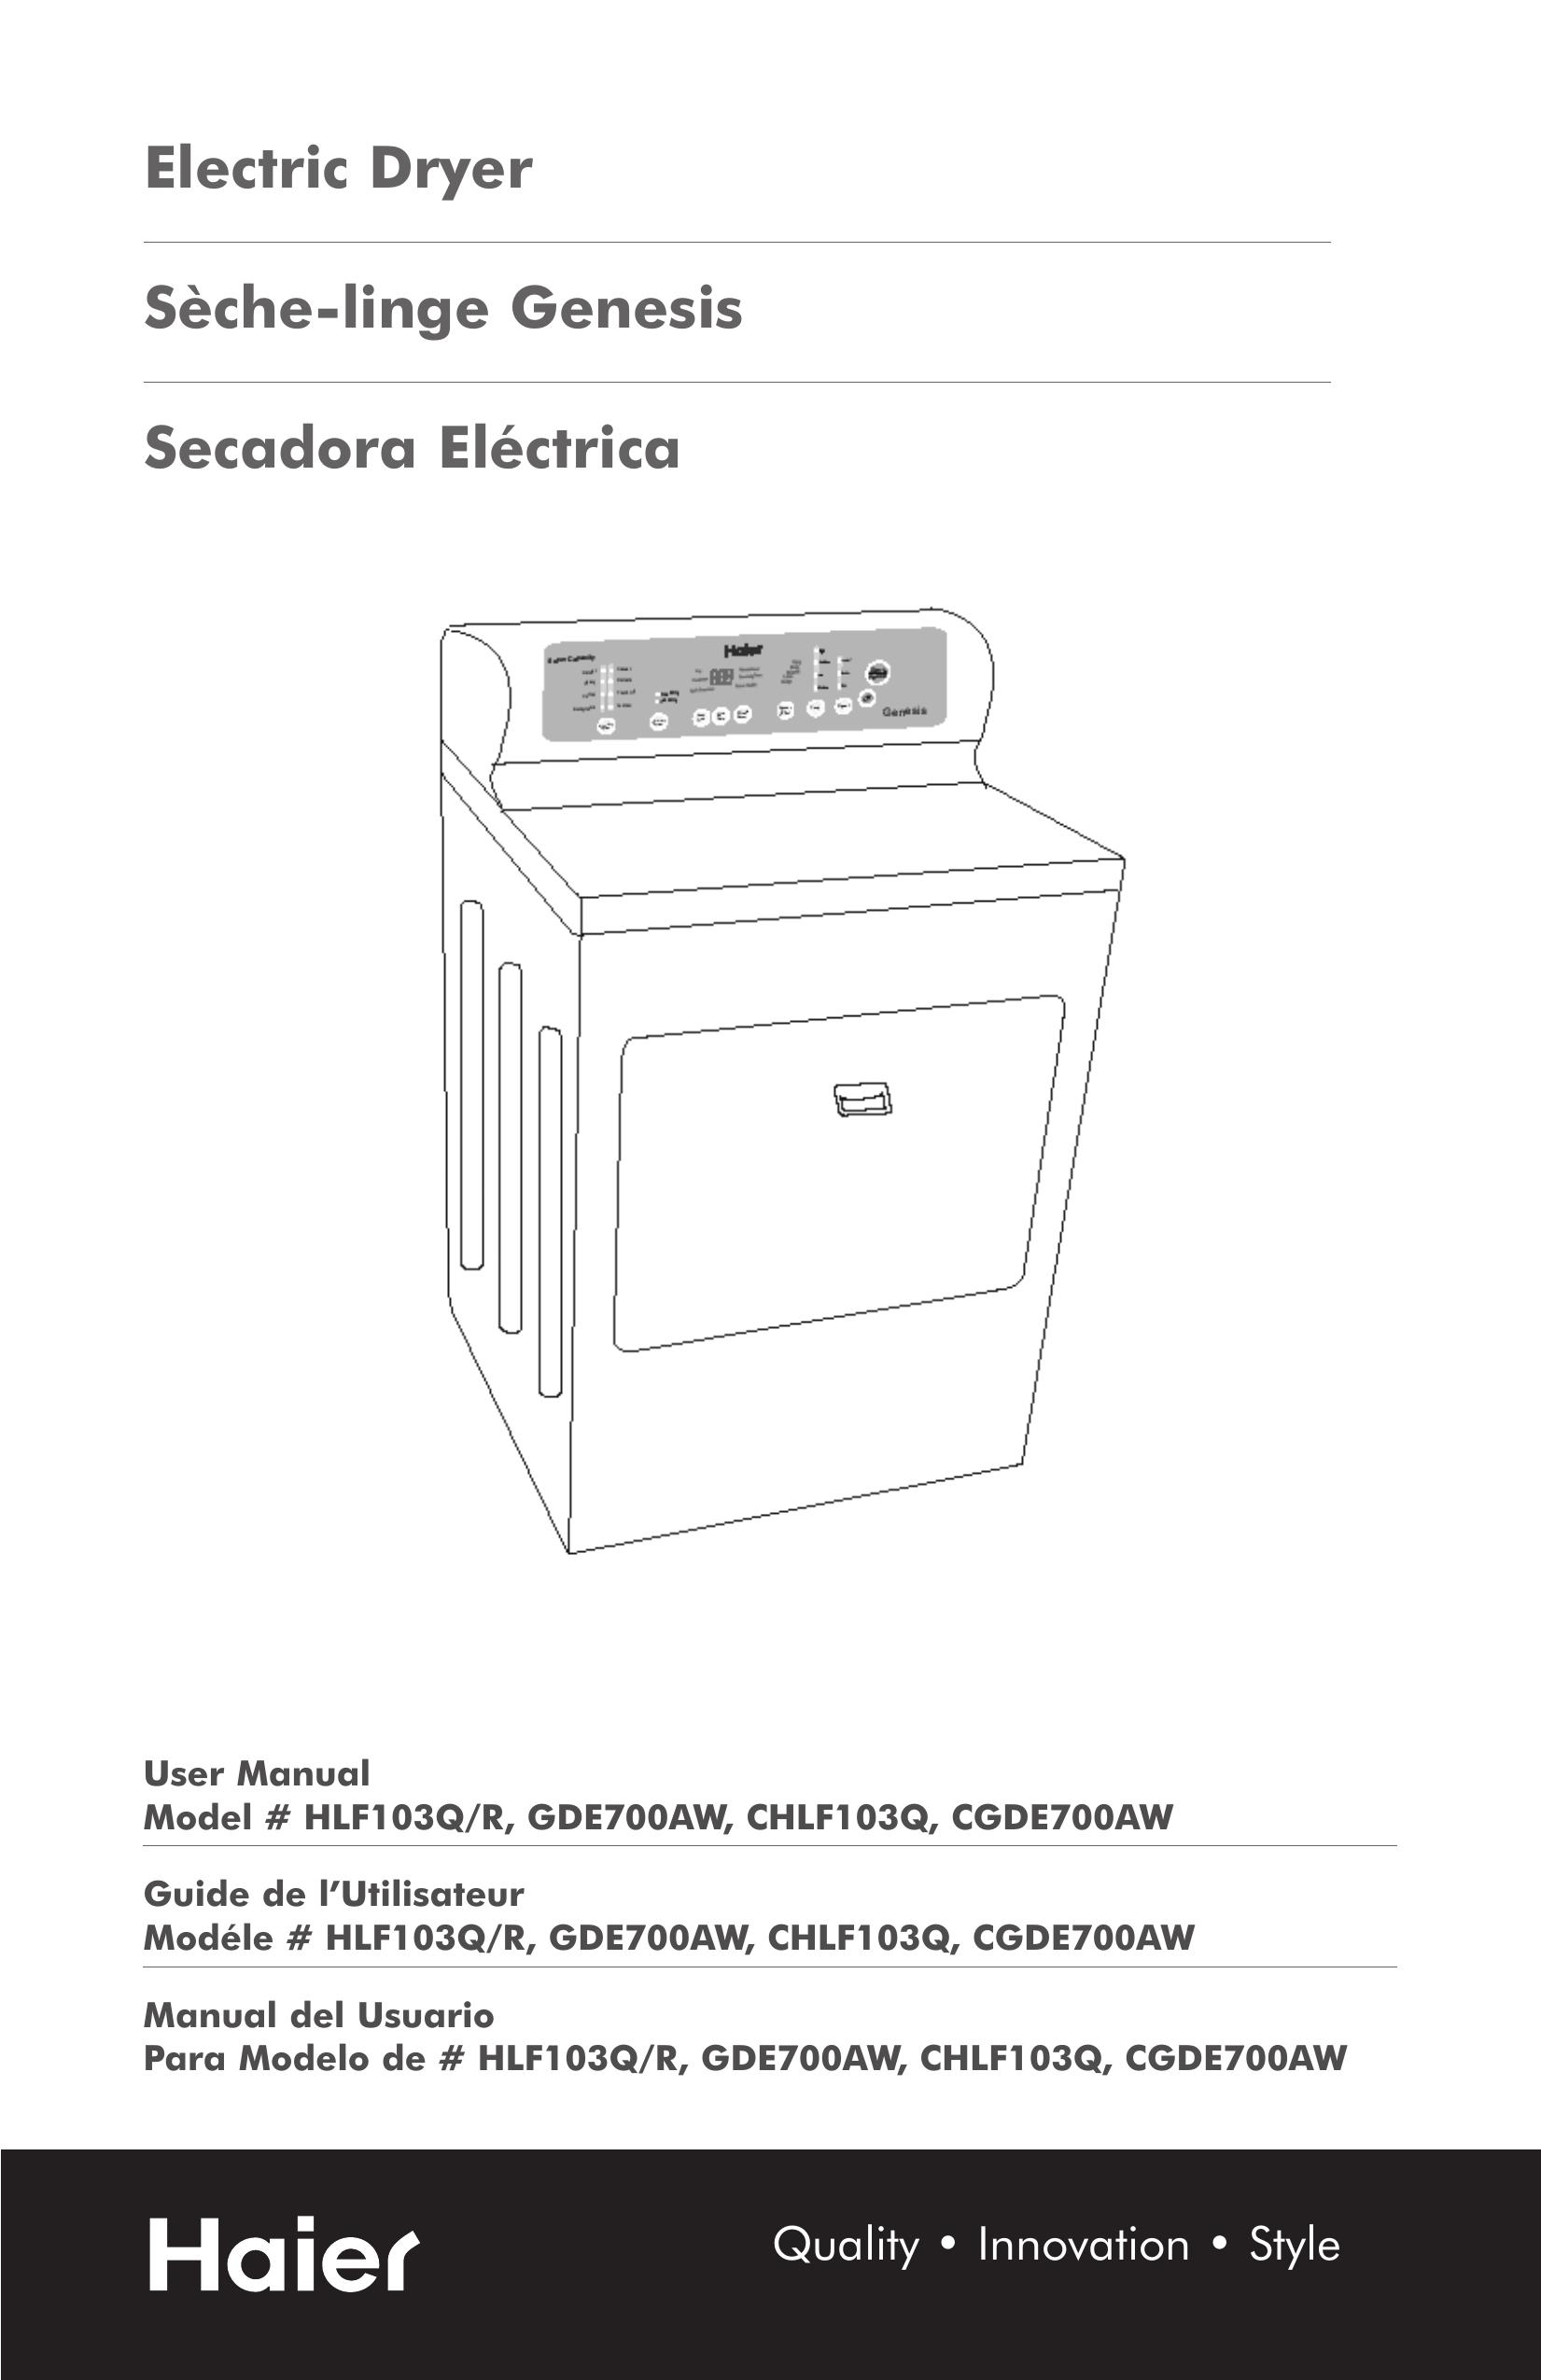 Haier GDE700AW Clothes Dryer User Manual